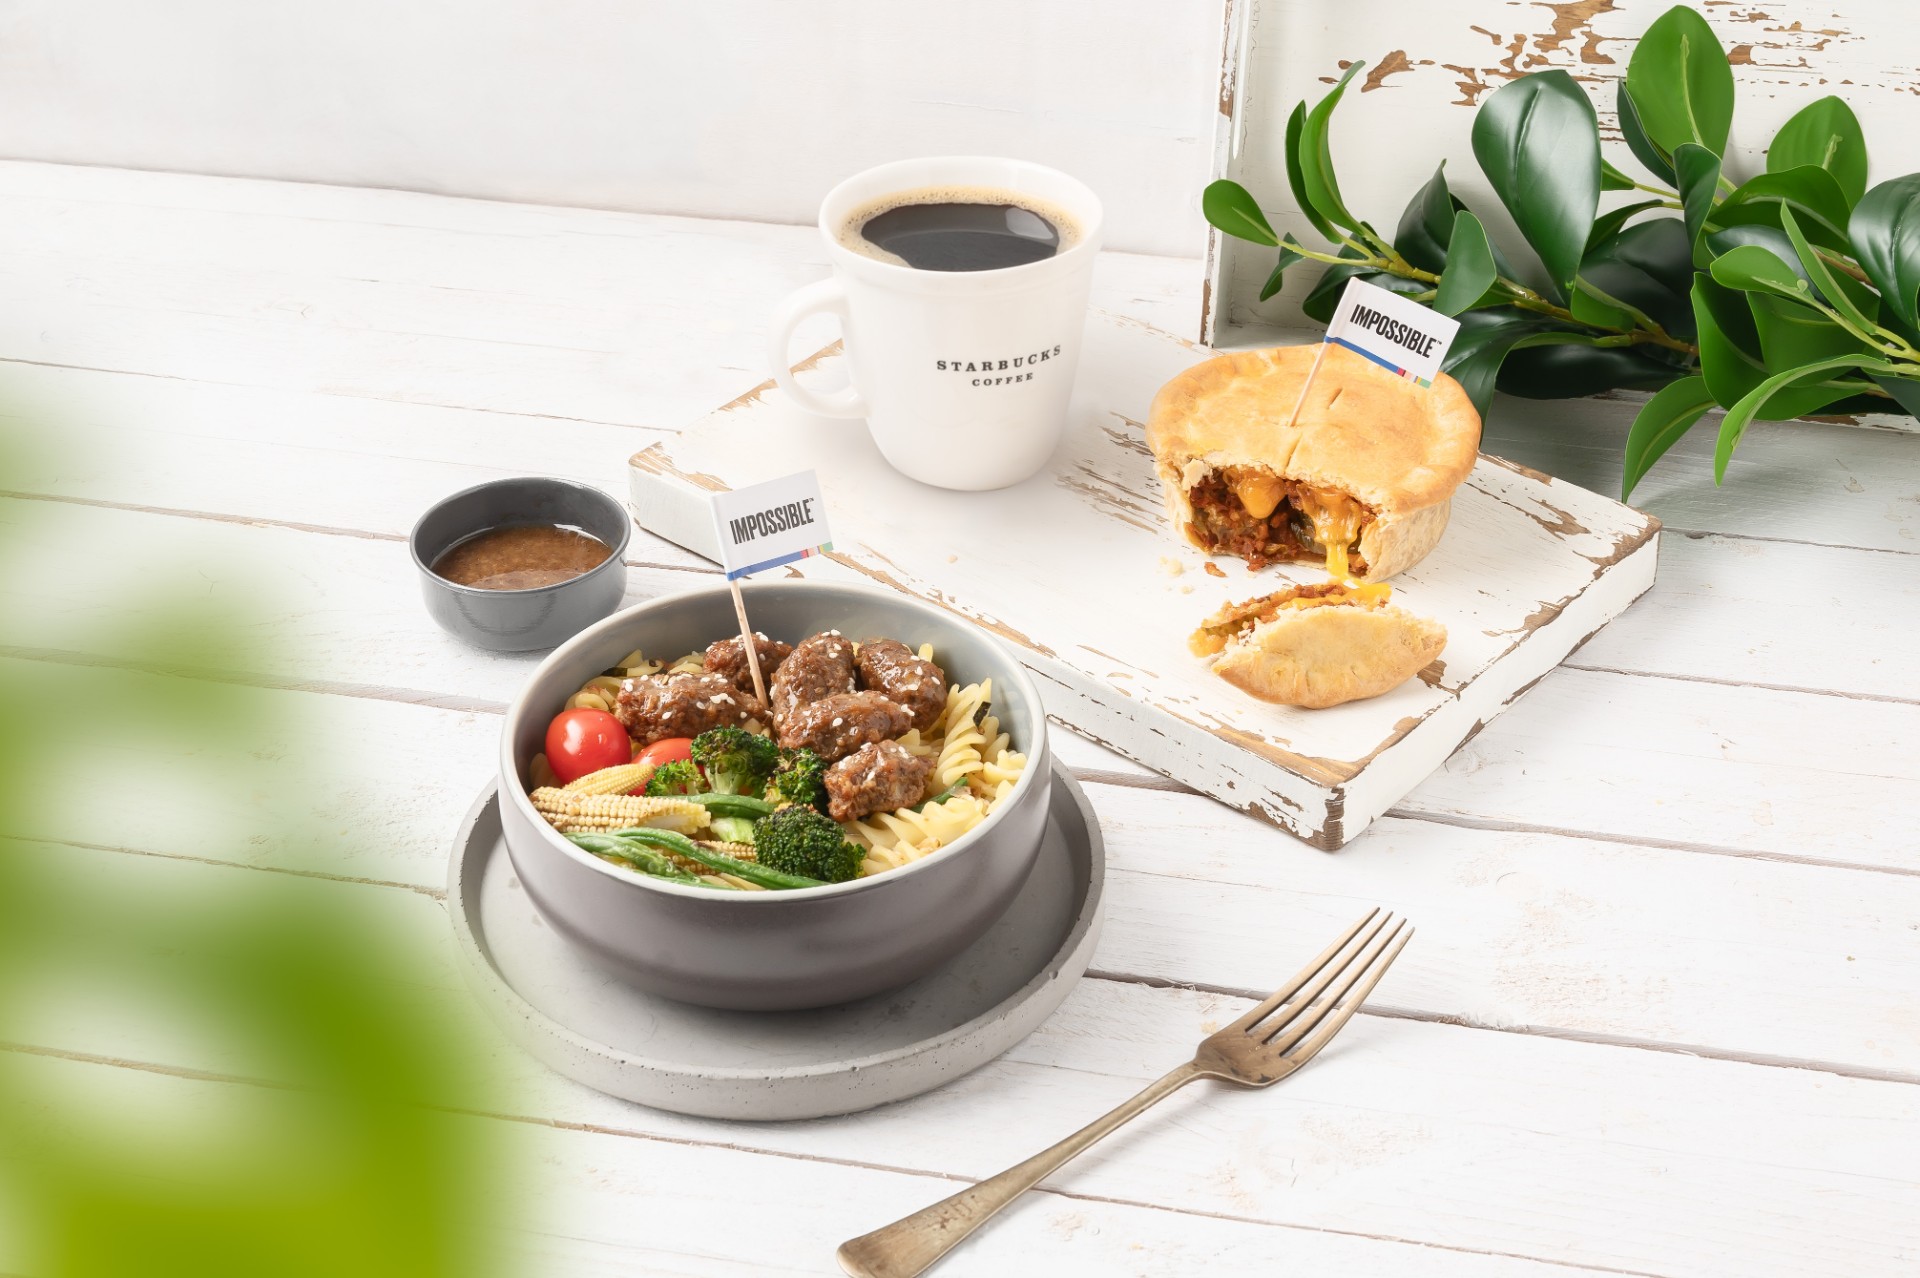 Group shot of the Impossible Pasta Salad Bowl and the Impossible Pie. Image: Starbucks Singapore
